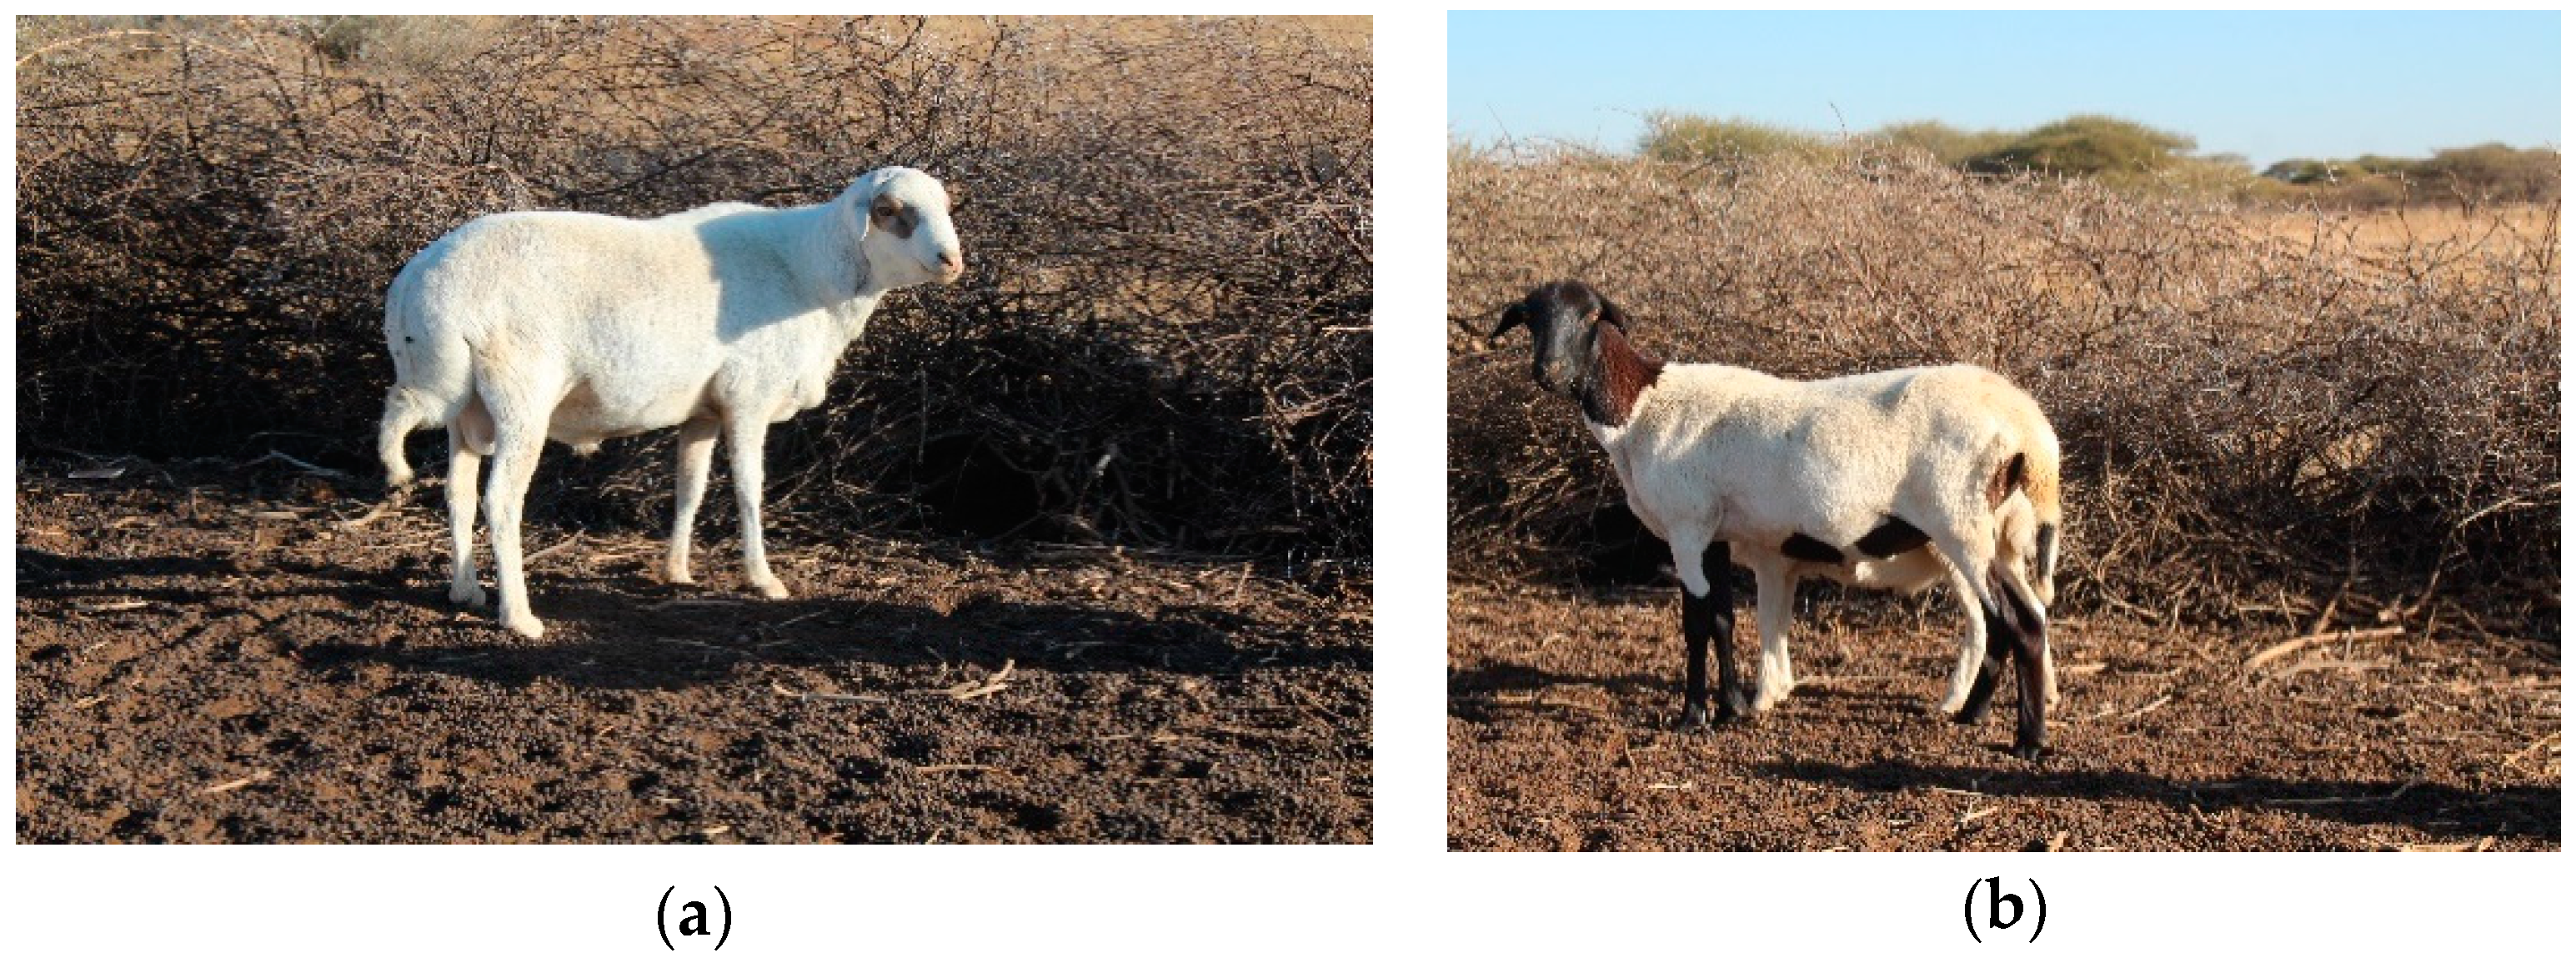 Animals | Free Full-Text | Production Characteristics and Management  Practices of Indigenous Tswana Sheep in Southern Districts of Botswana